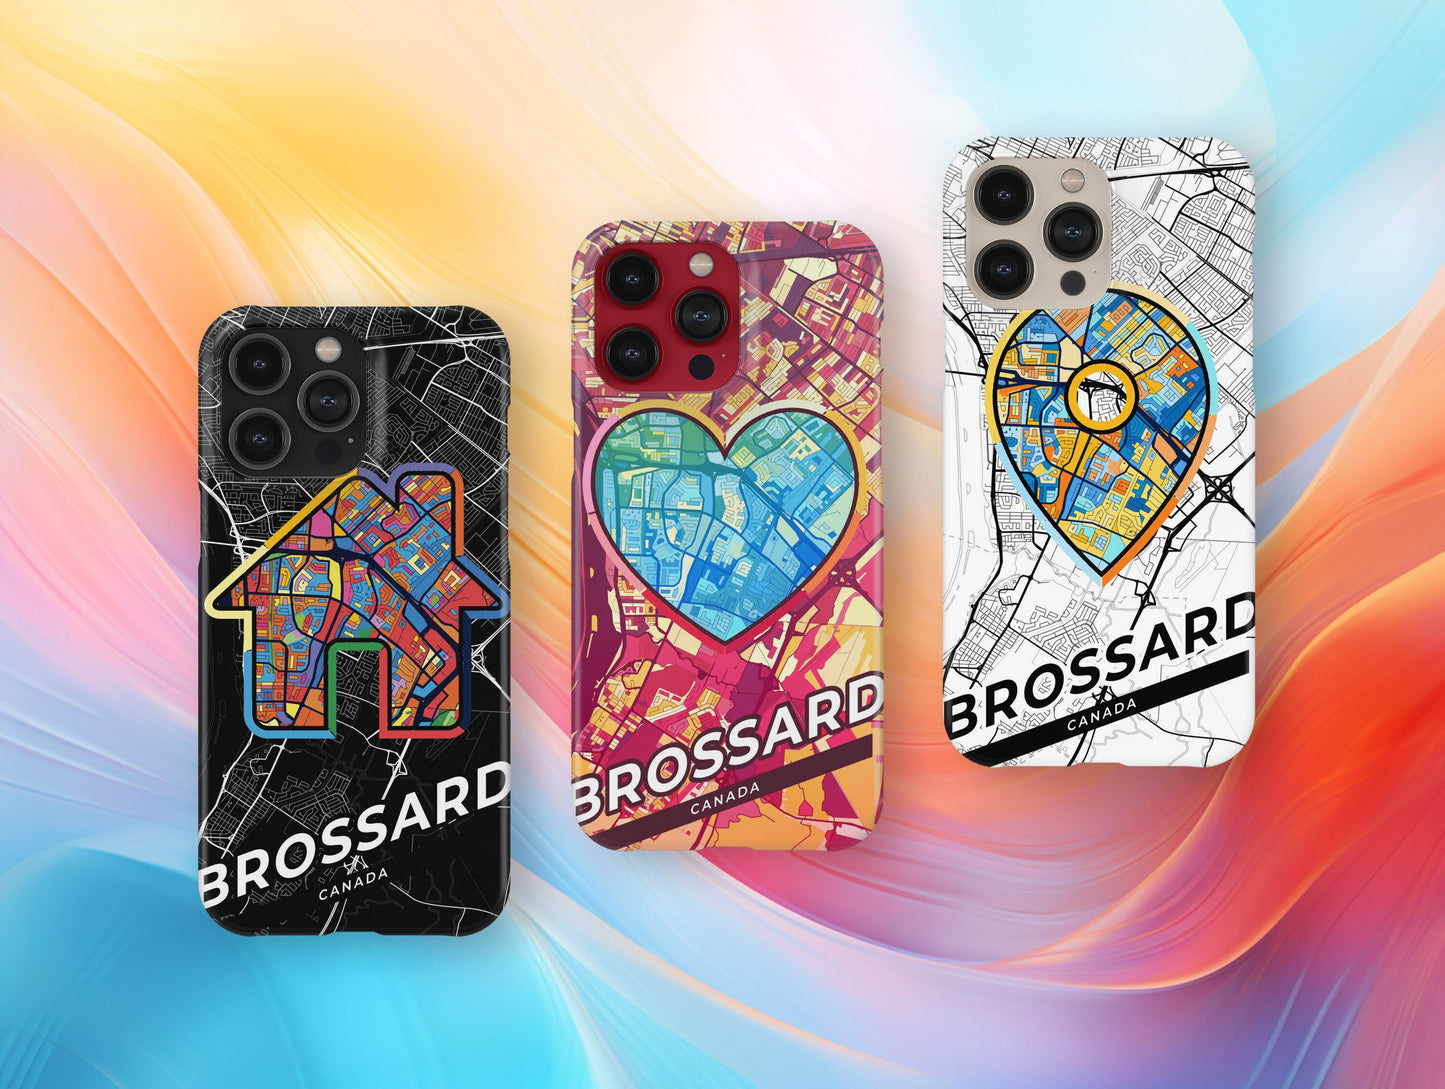 Brossard Canada slim phone case with colorful icon. Birthday, wedding or housewarming gift. Couple match cases.